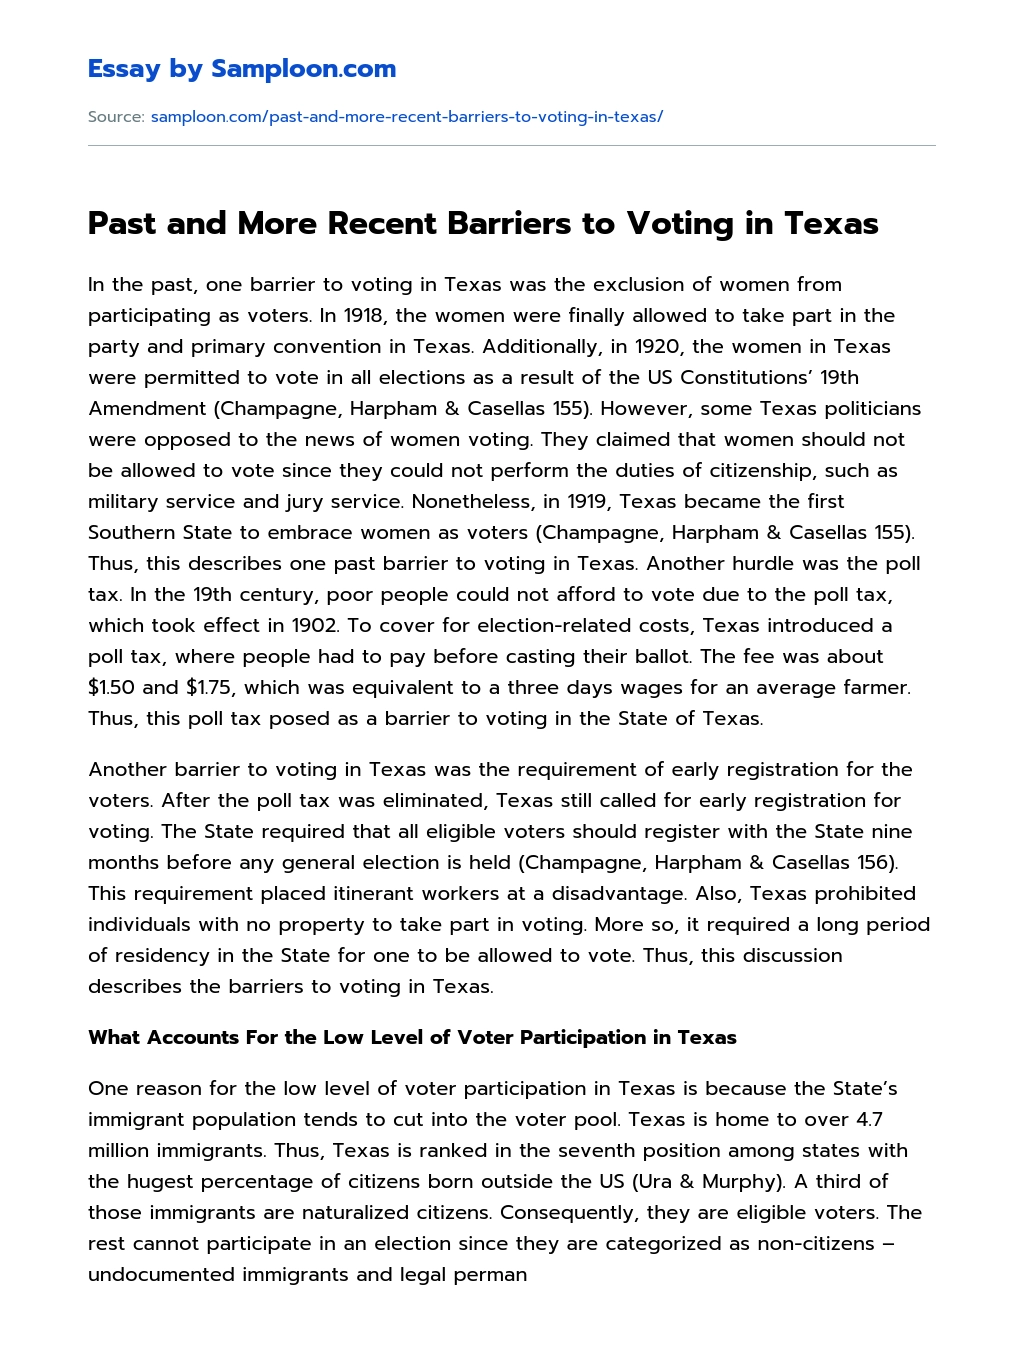 Past and More Recent Barriers to Voting in Texas essay